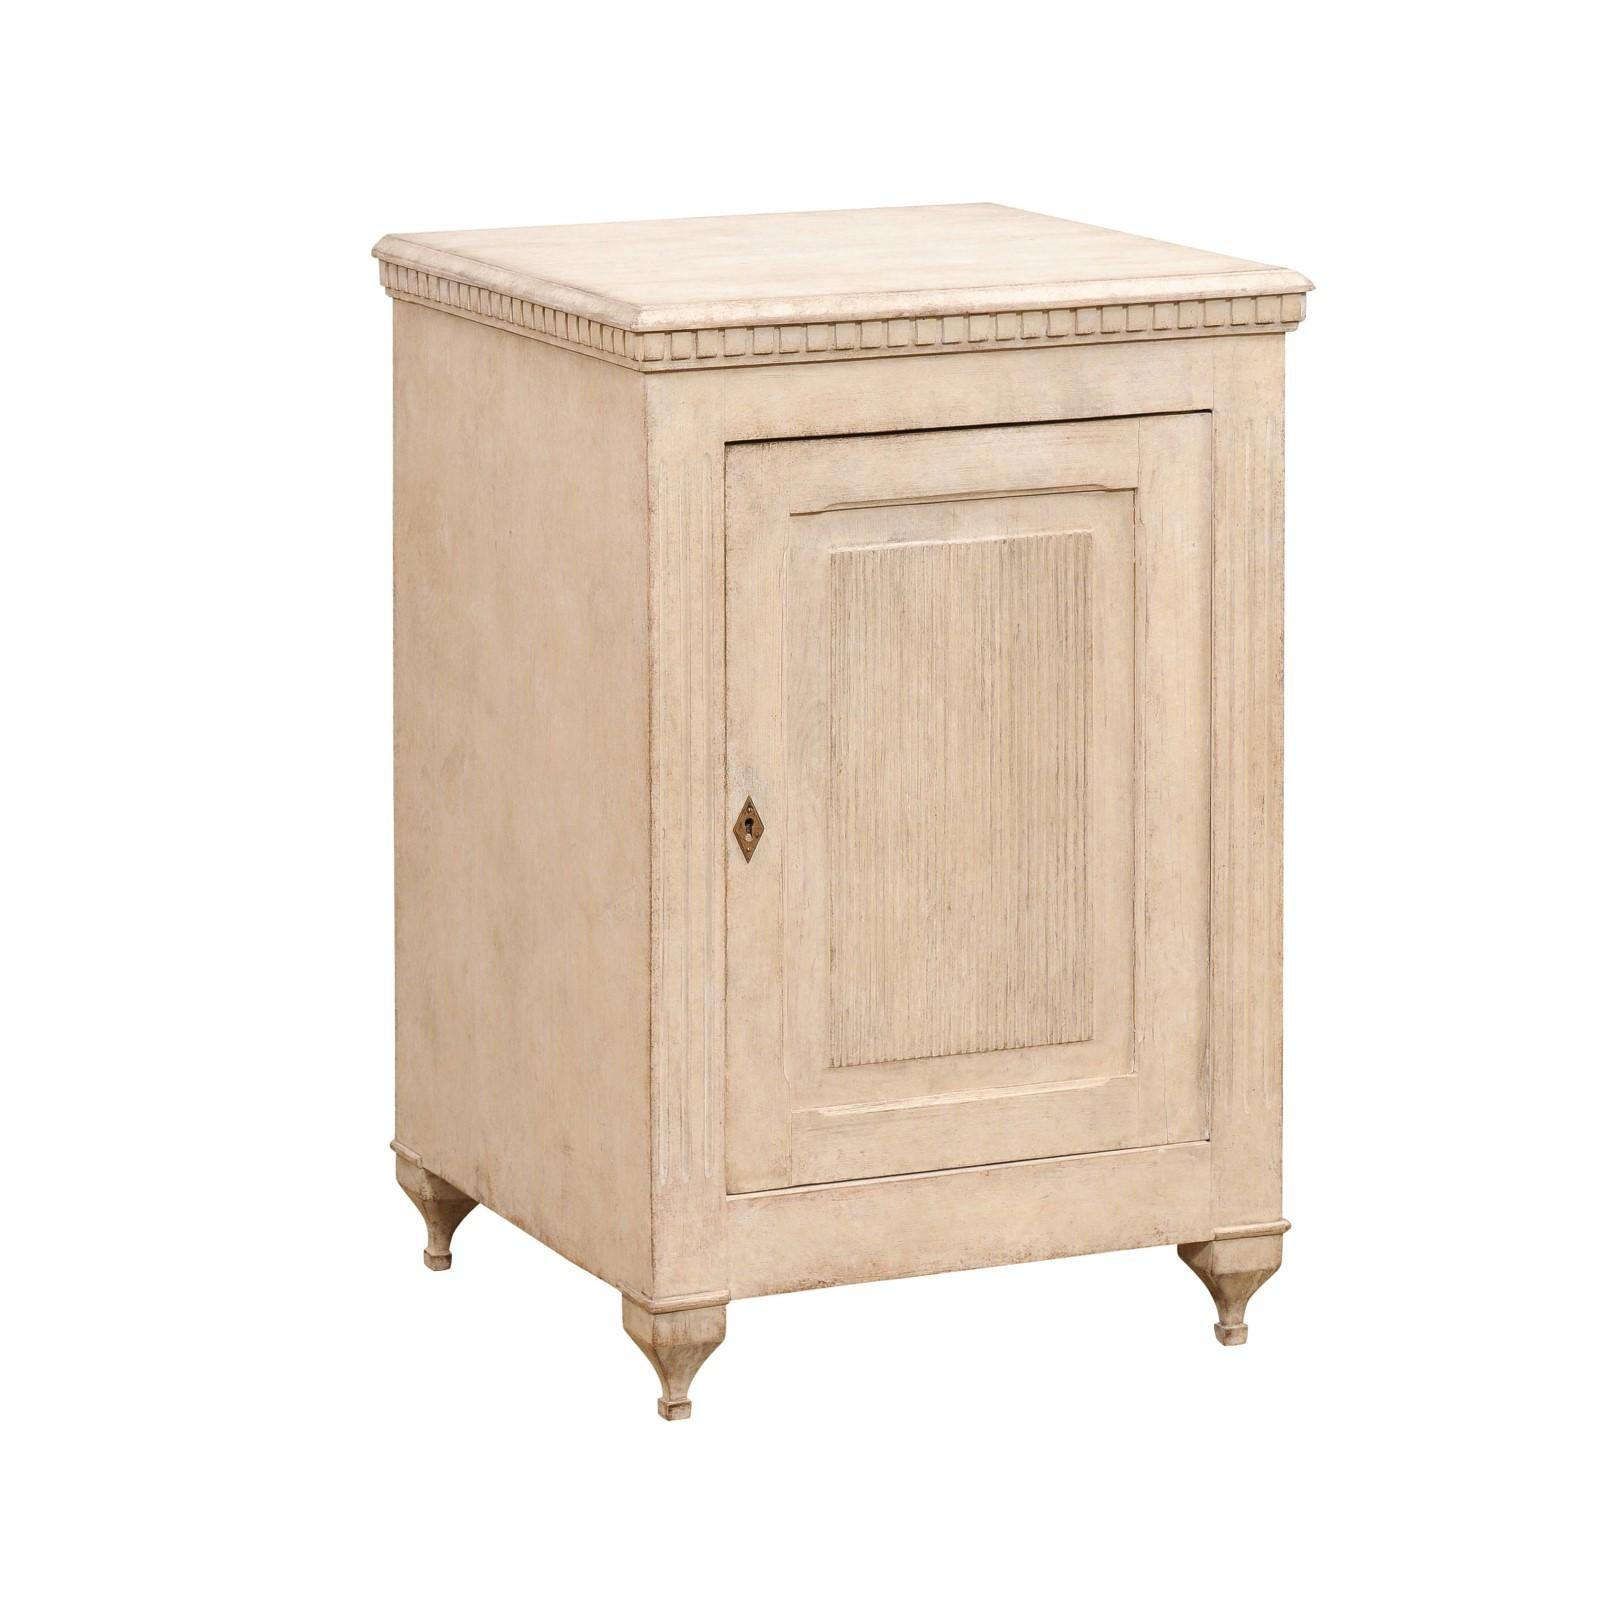 A Swedish Gustavian style painted wood side cabinet from the 19th century, with carved dentil molding, reeded door and petite carved feet. Created in Sweden during the 19th century, this painted side cabinet features the stylistic characteristics of